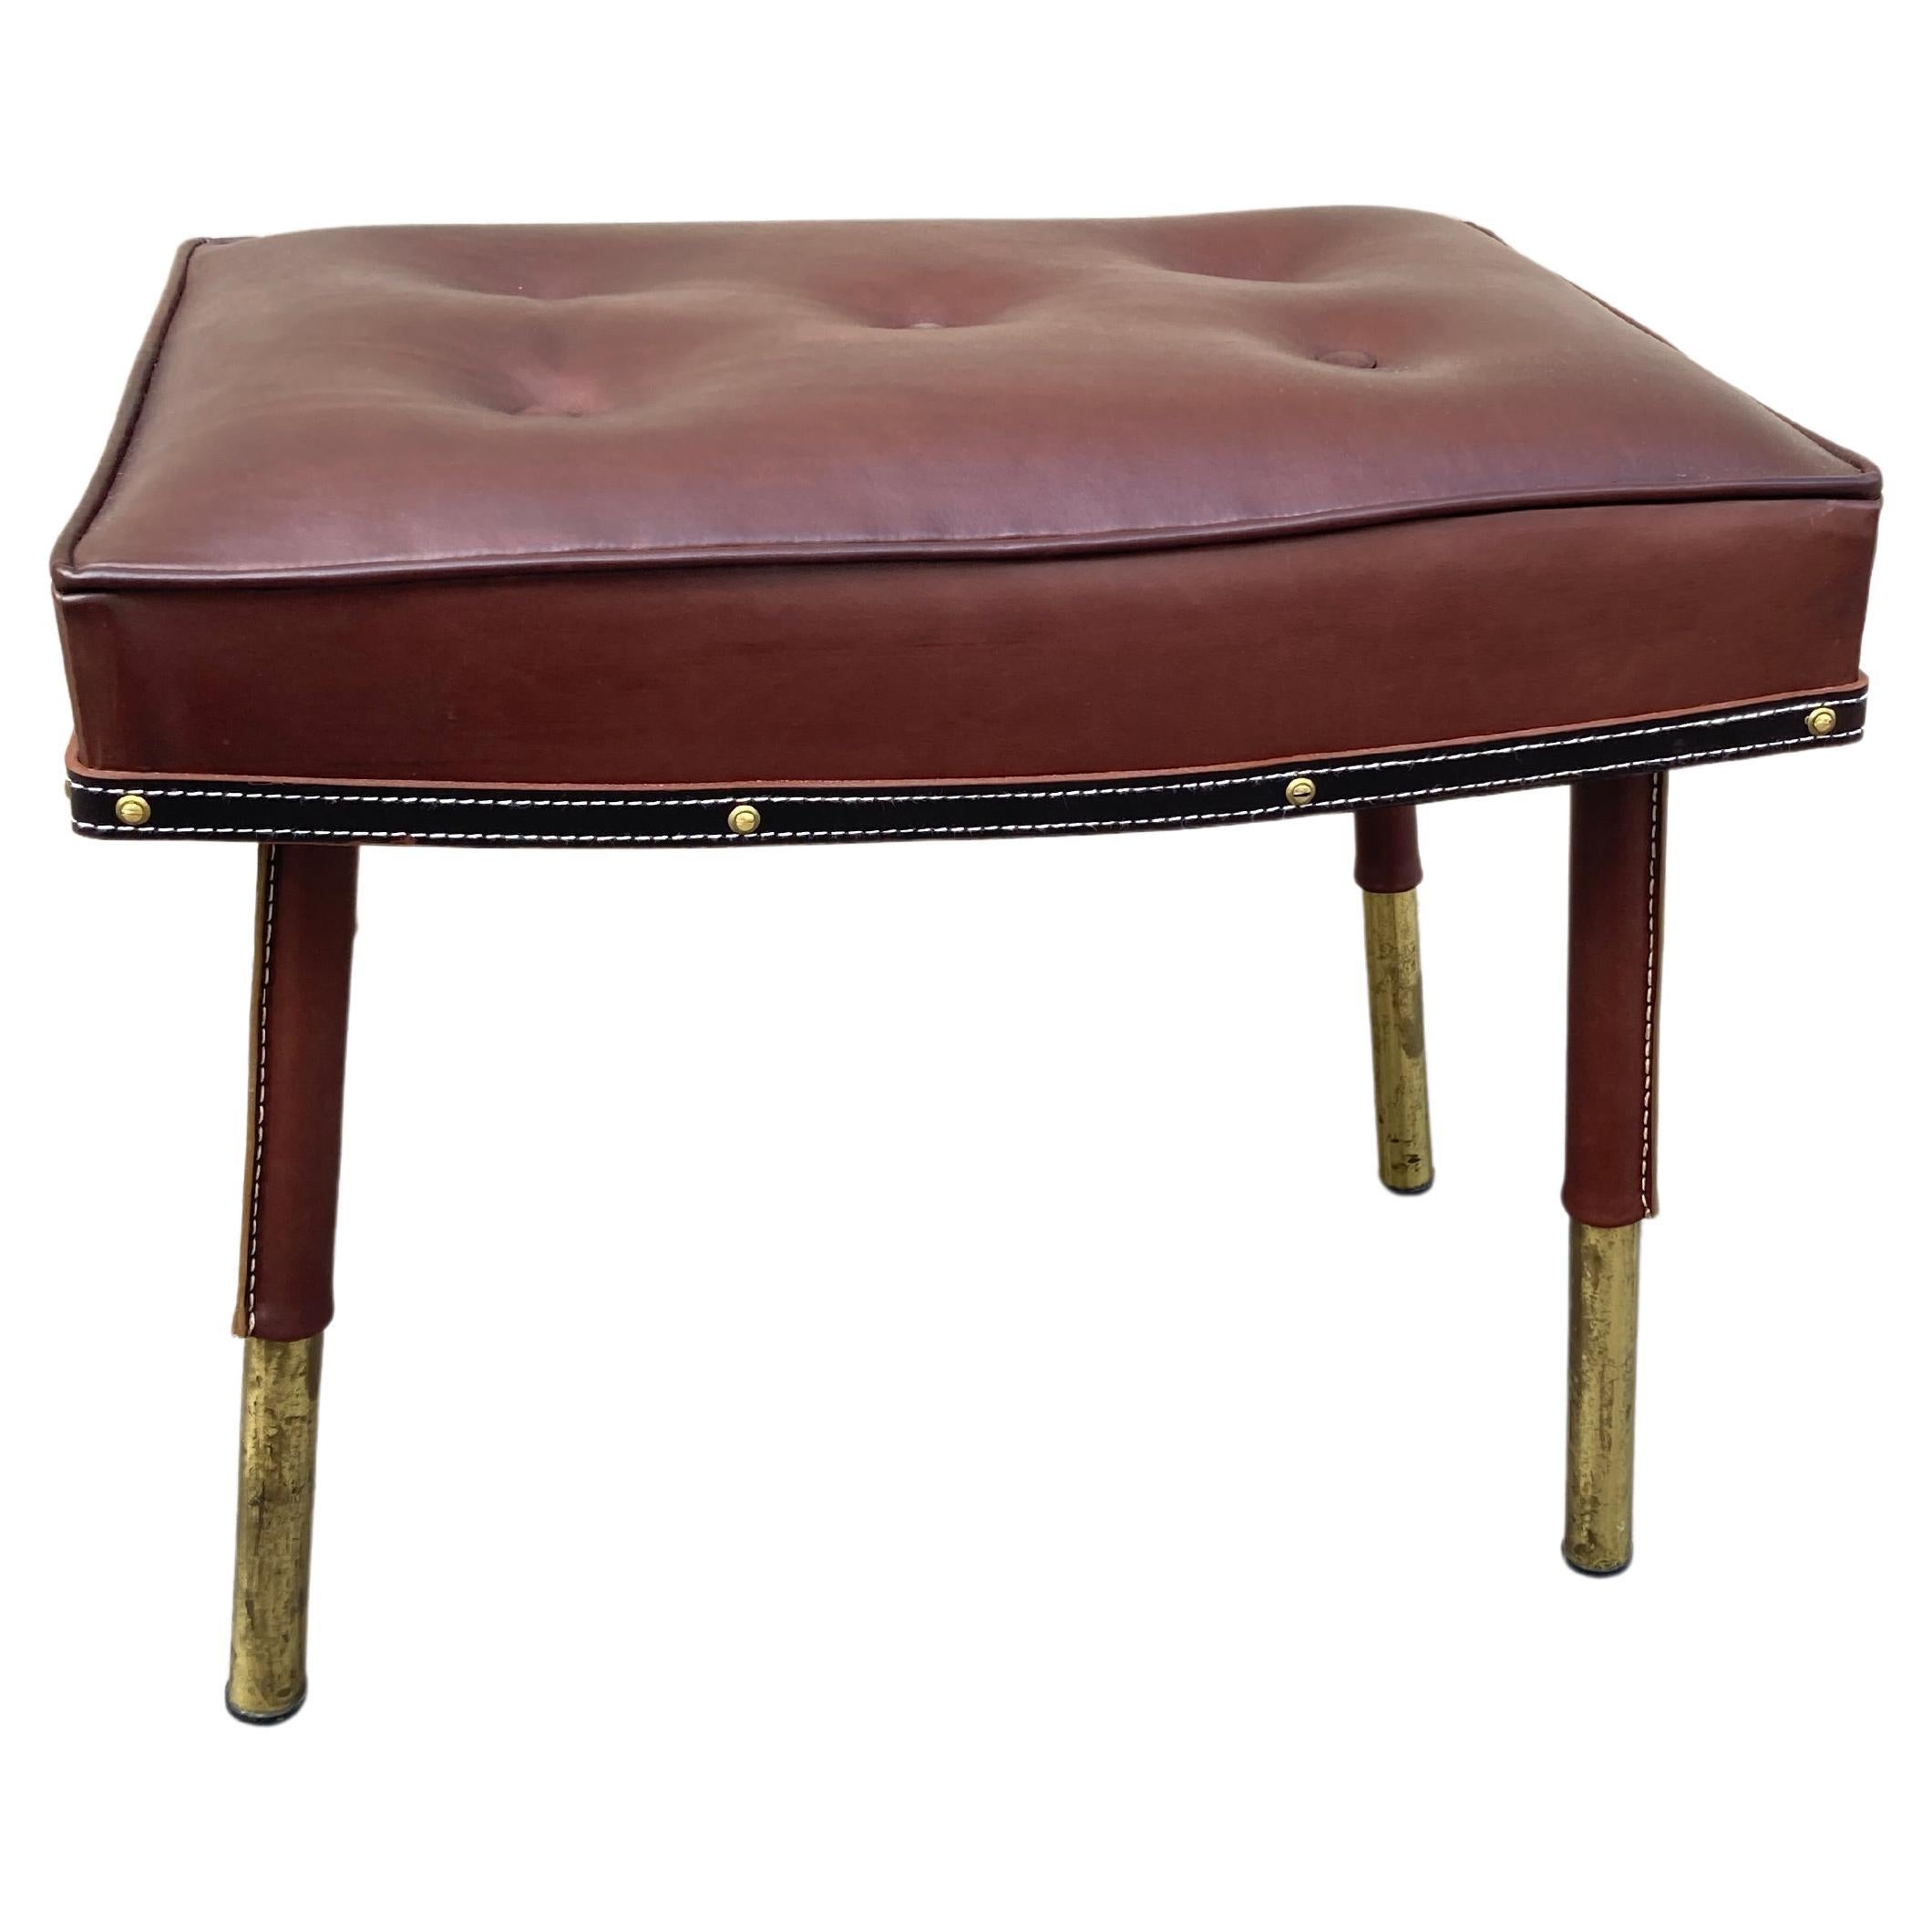 1950's Stitched leather ottoman by Jacques Adnet